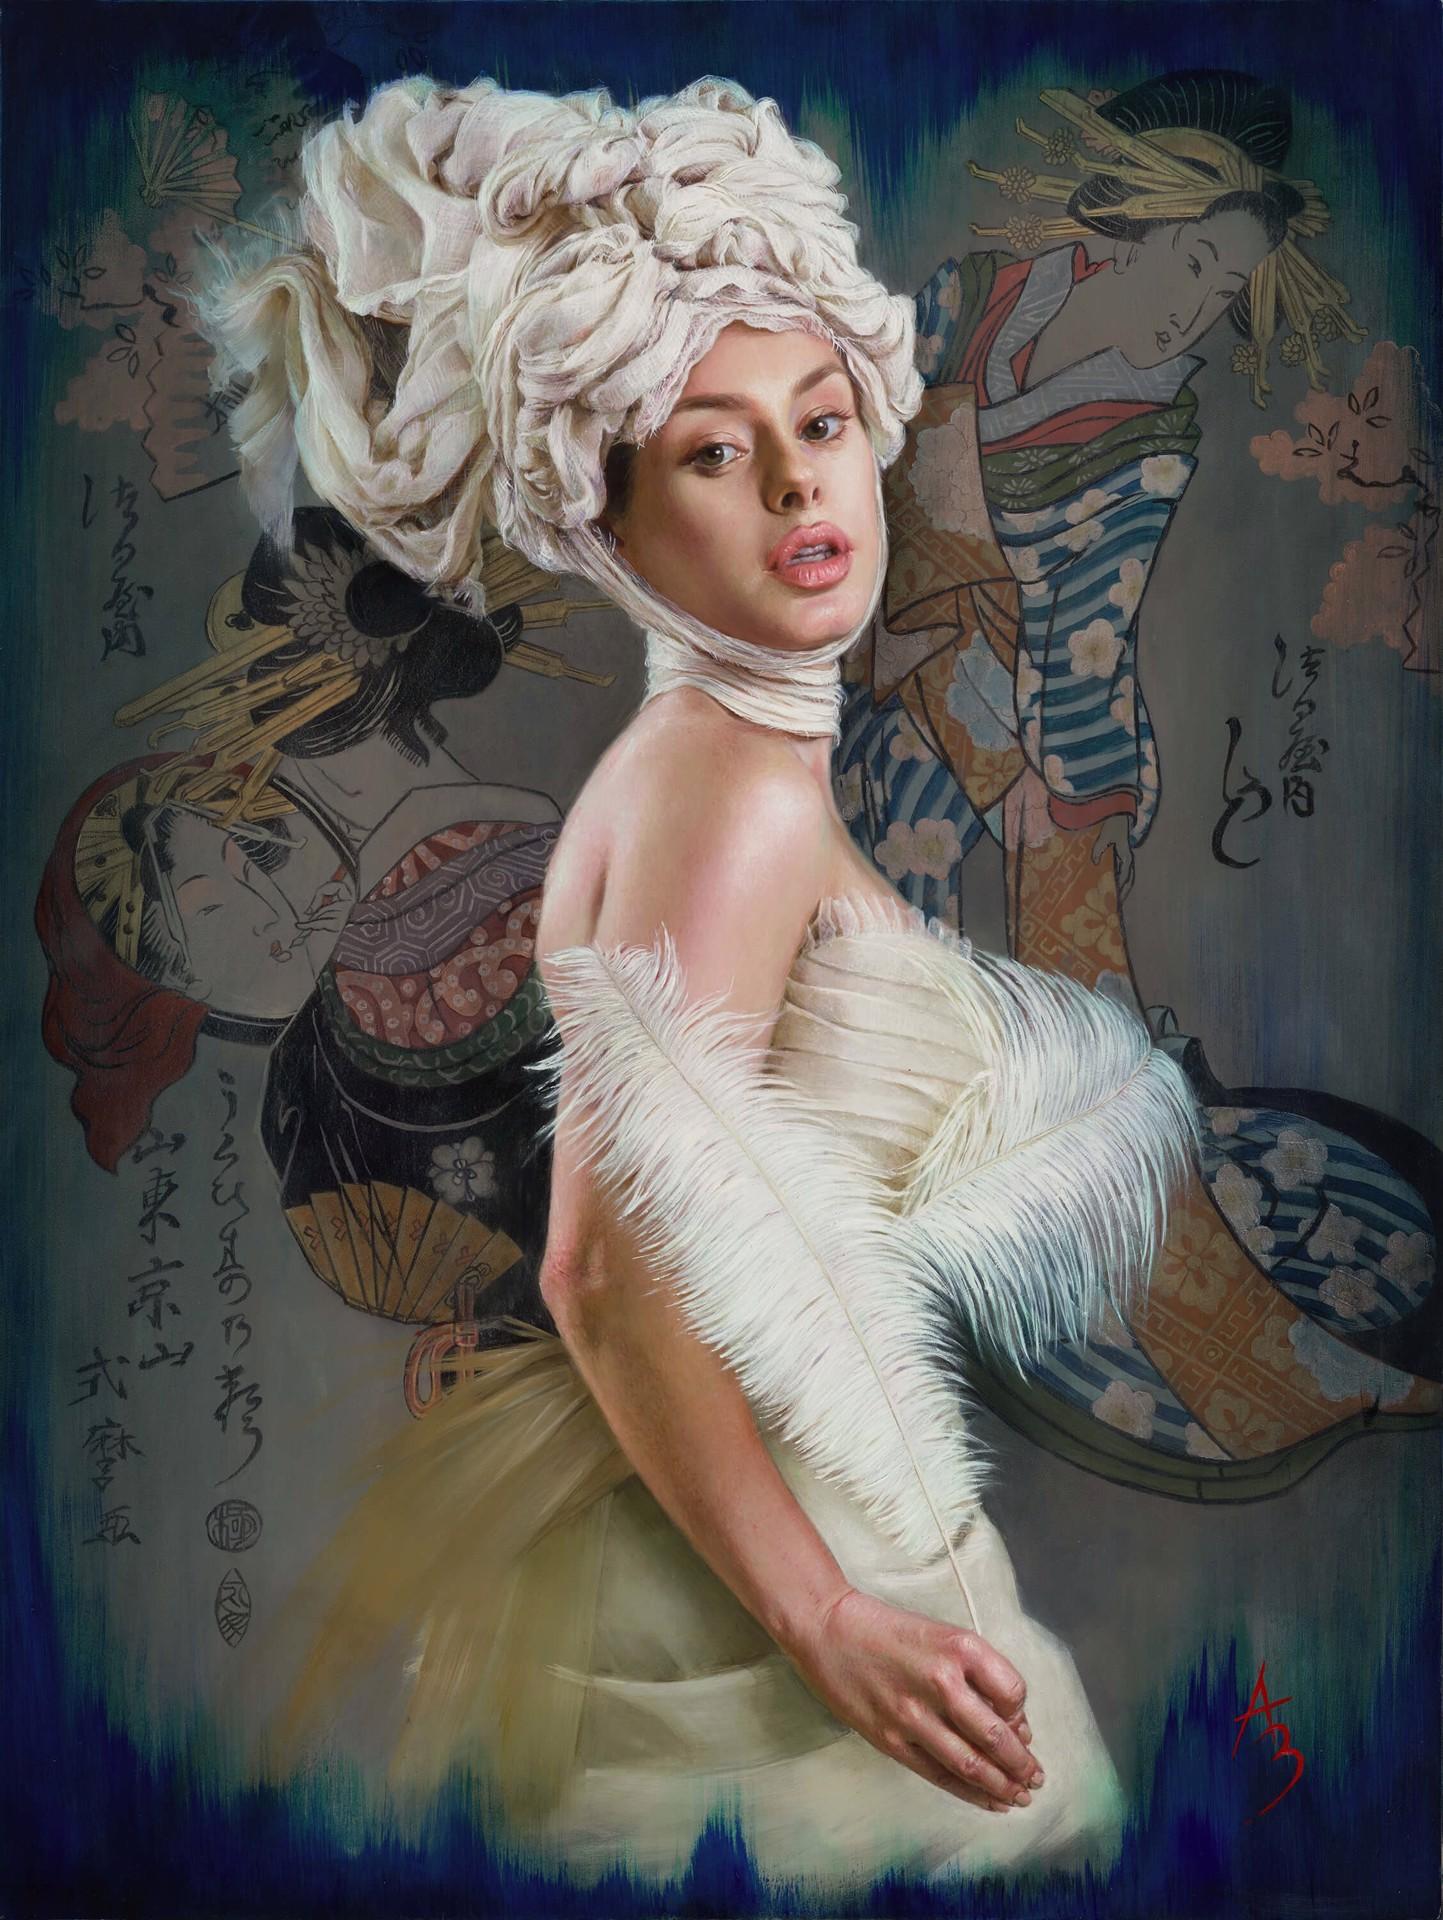 Alexandra Manukyan Figurative Art - "Visions In Pale Splendor" - Oil Painting, Cultural Fusion with Female Model